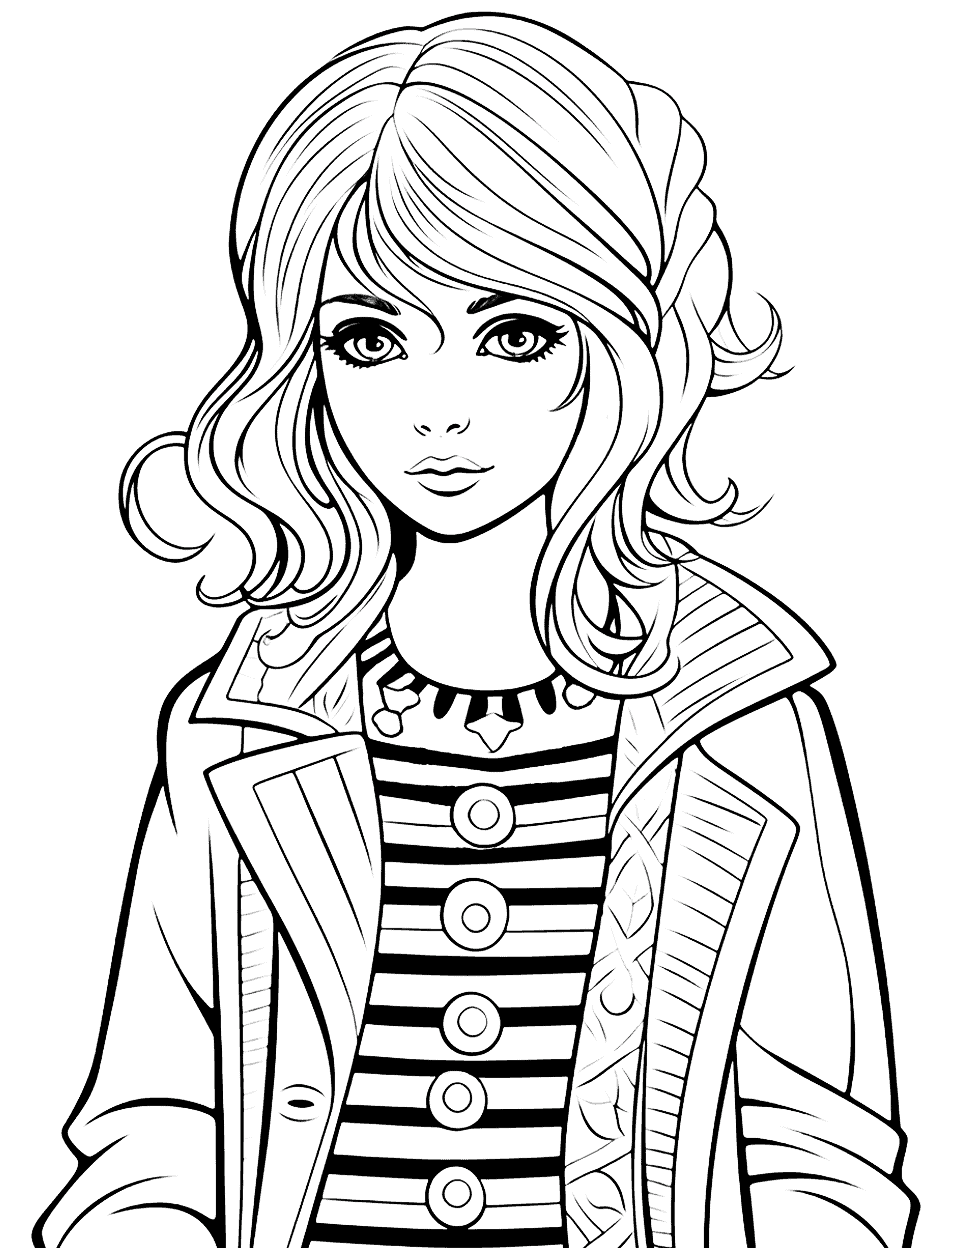 Fashion Girl Adult Coloring Page - A stylish girl dressed in the latest fashion trends.